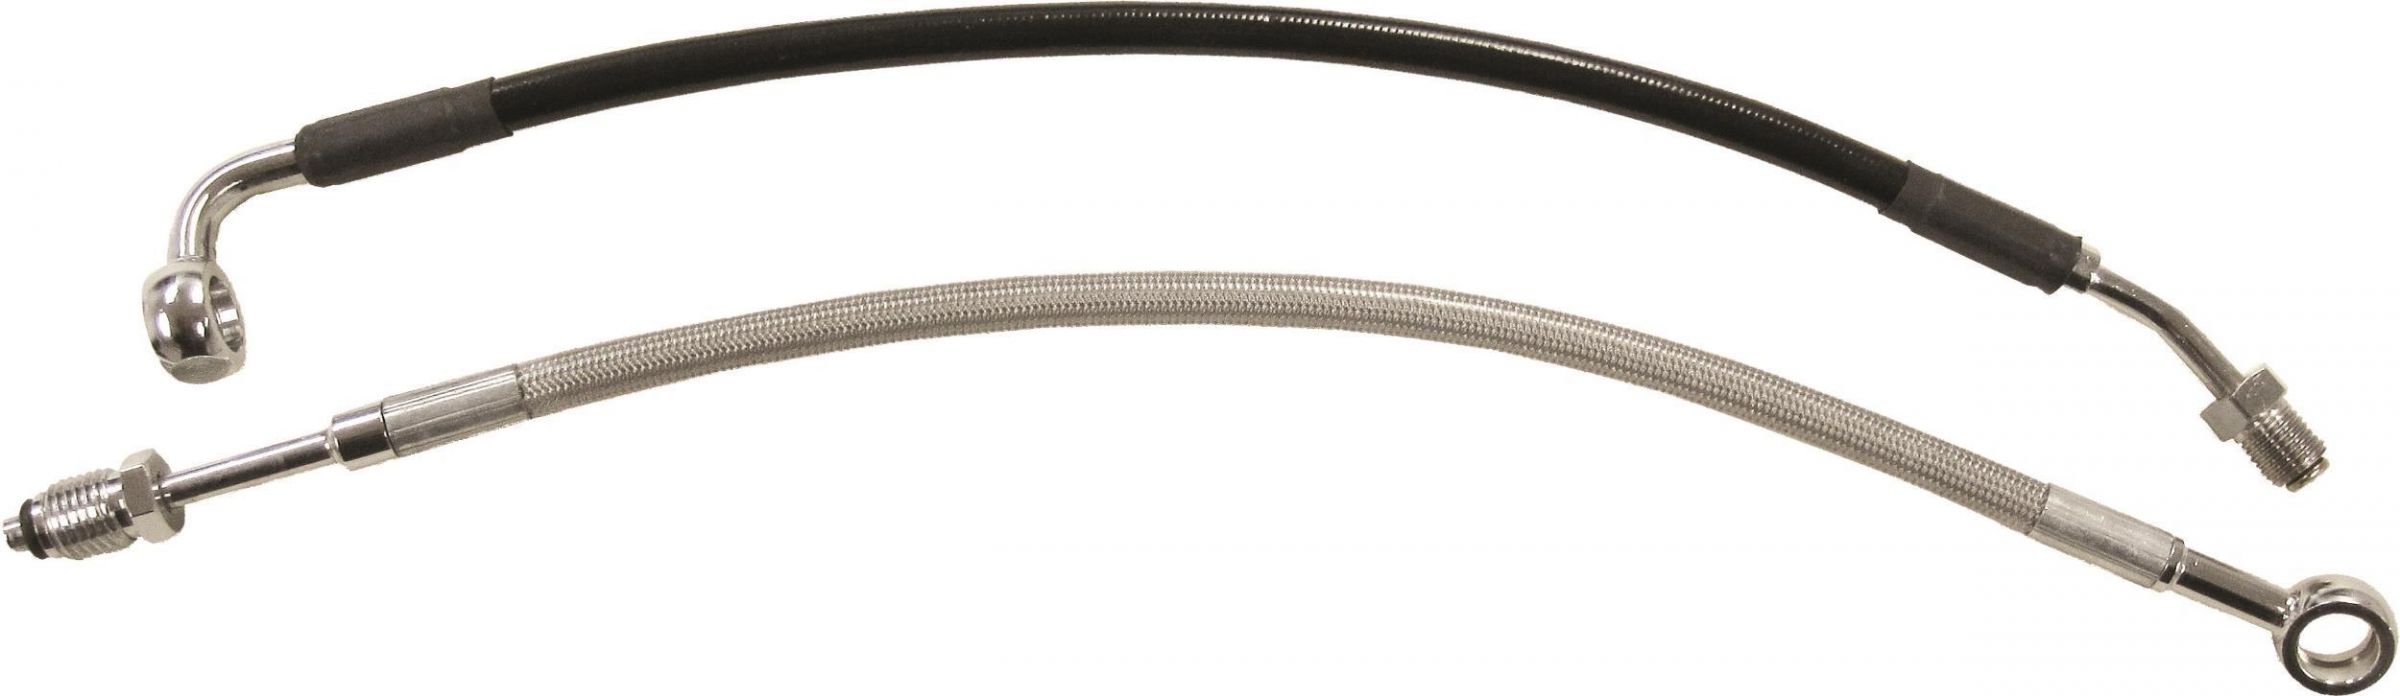 86OF-GOODRIDG-HD0005-1CBK-2 Stainless Steel Braided Hydraulic Clutch Line Kit - 2in. Over Stock - Black Hose